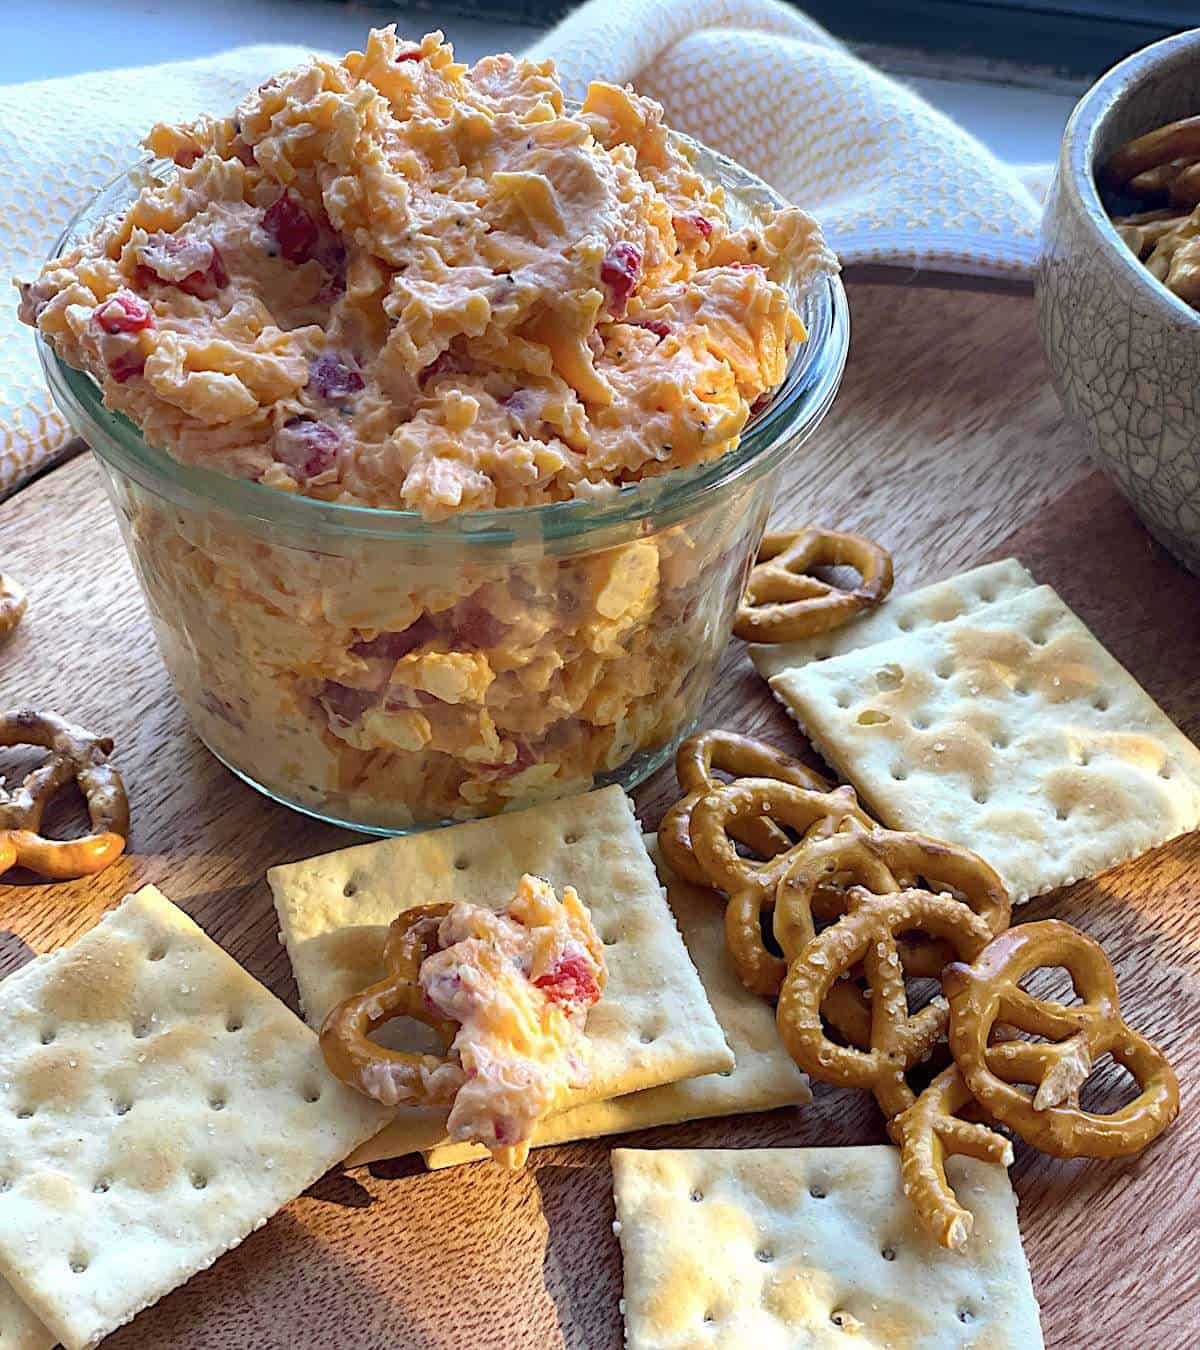 A glass bowl of homemade pimento cheese surrounded by pretzels and crackers.